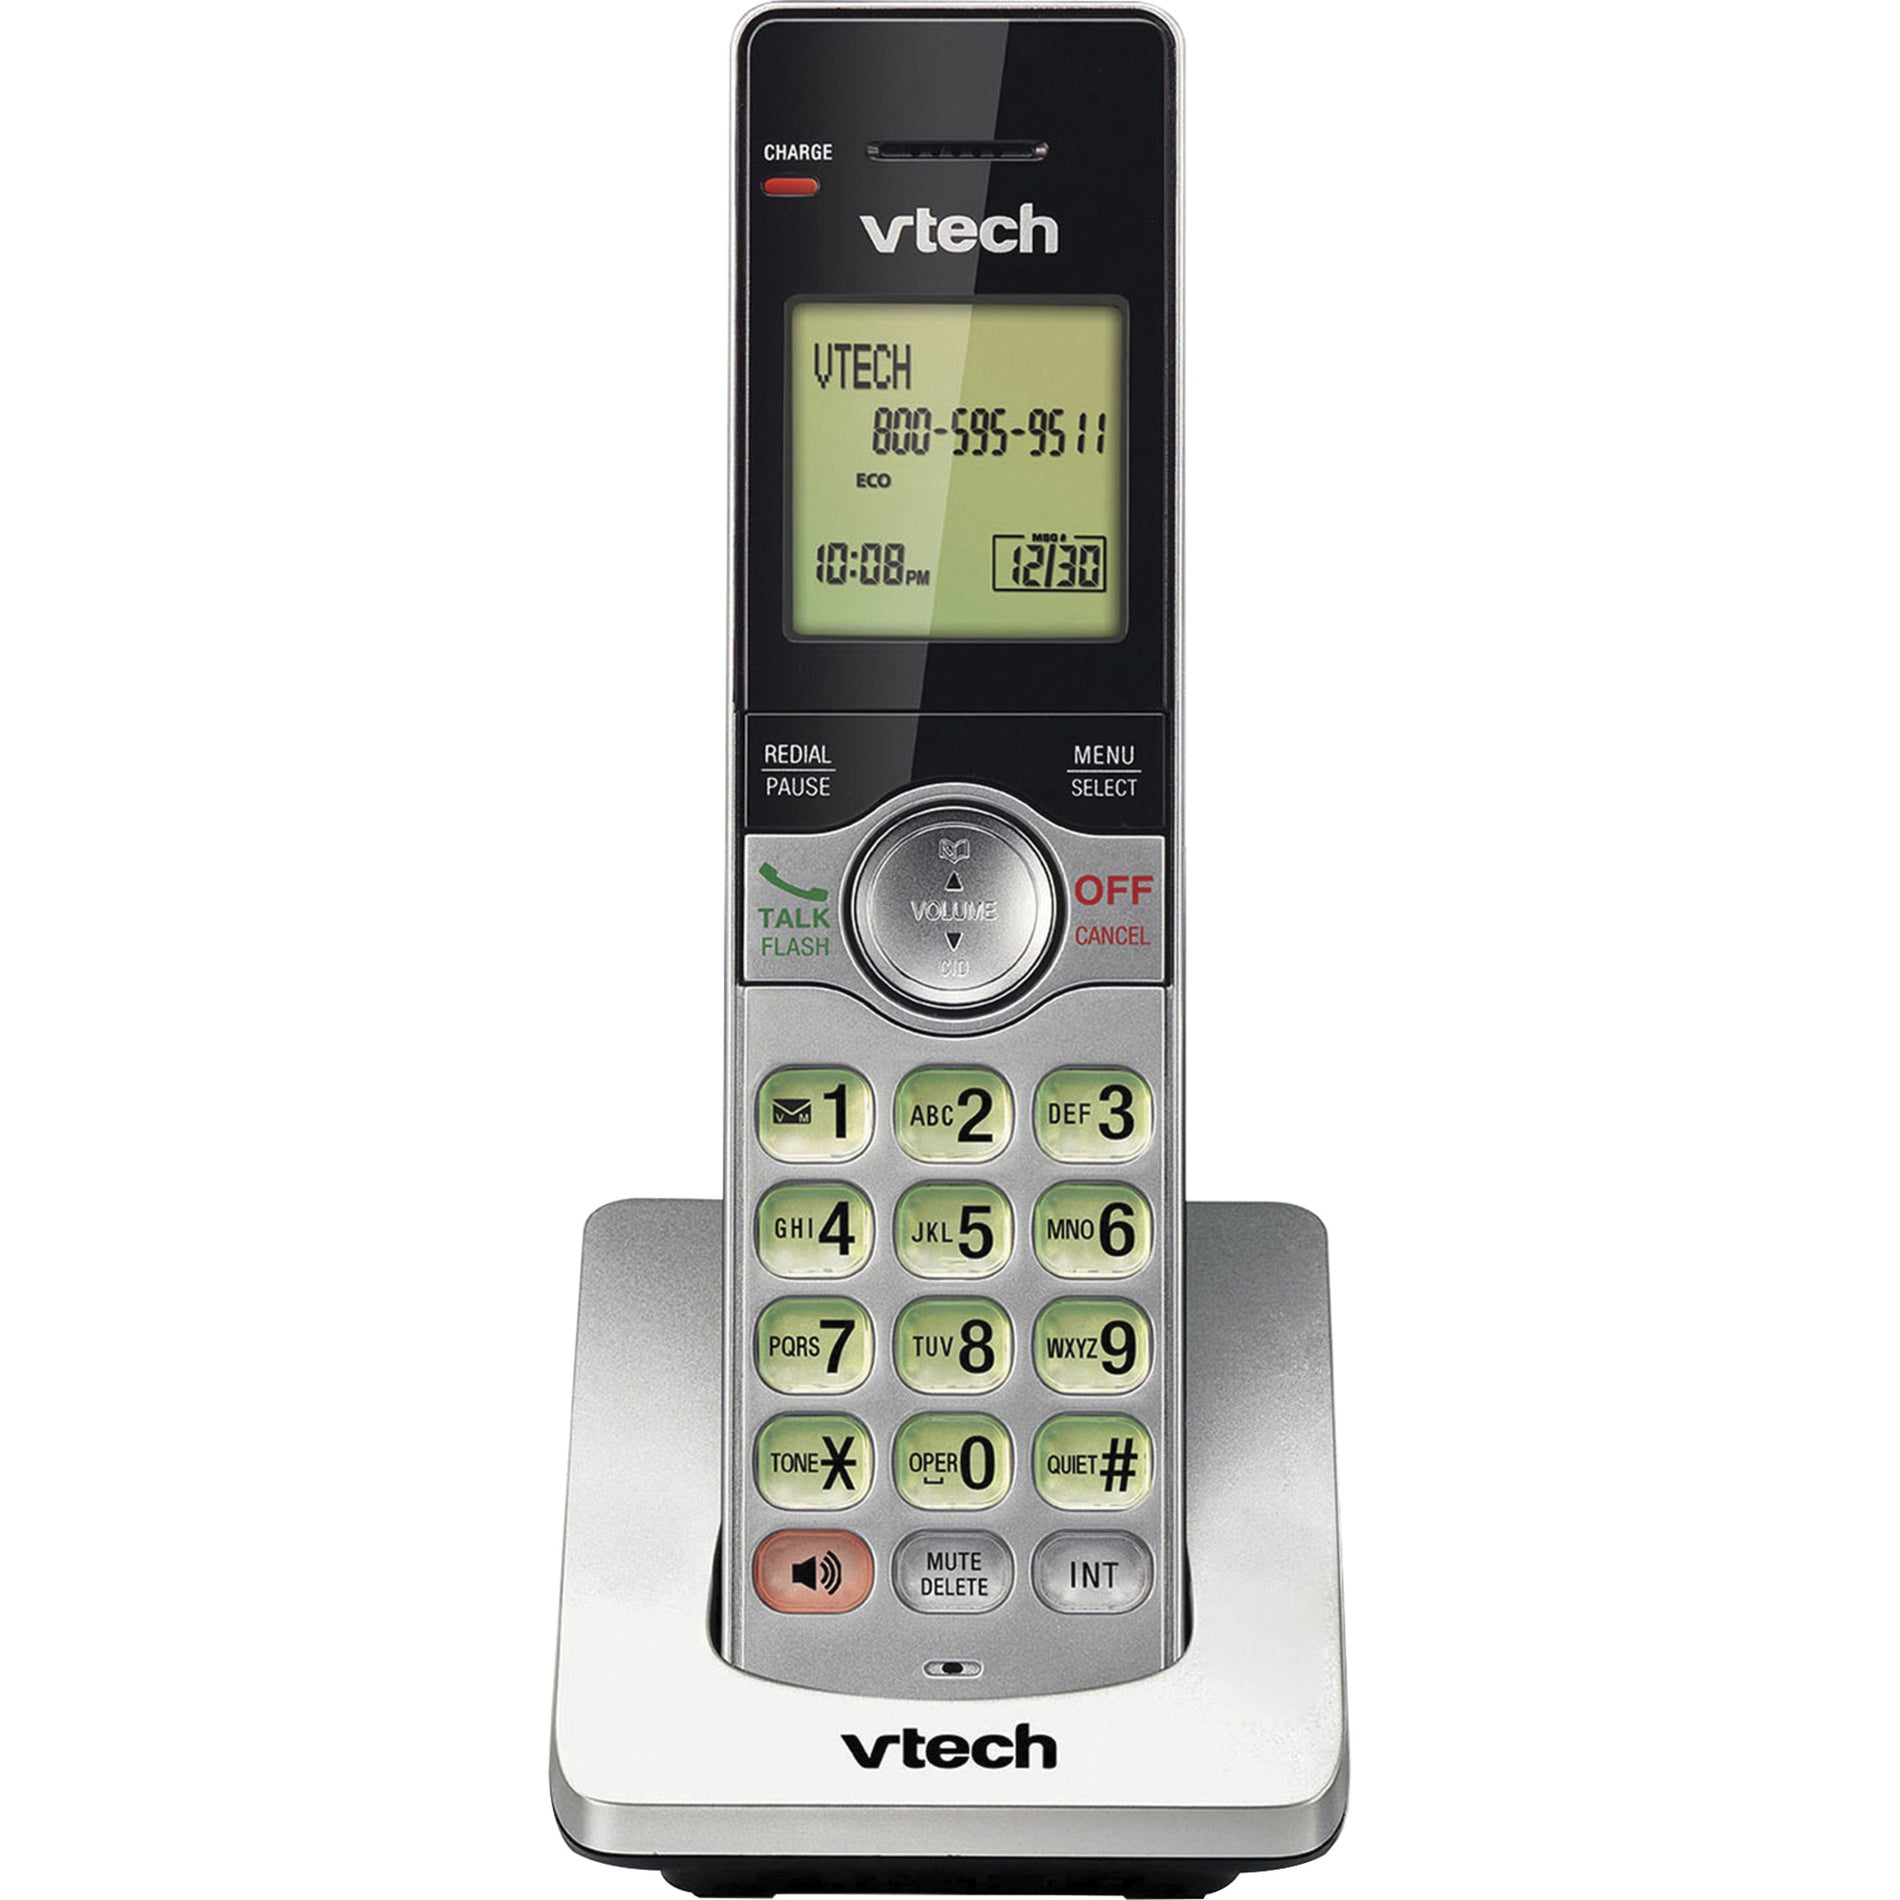 VTech CS6909 Accessory Handset with Caller ID/Call Waiting, LCD Screen, DECT 6.0, Silver/Black